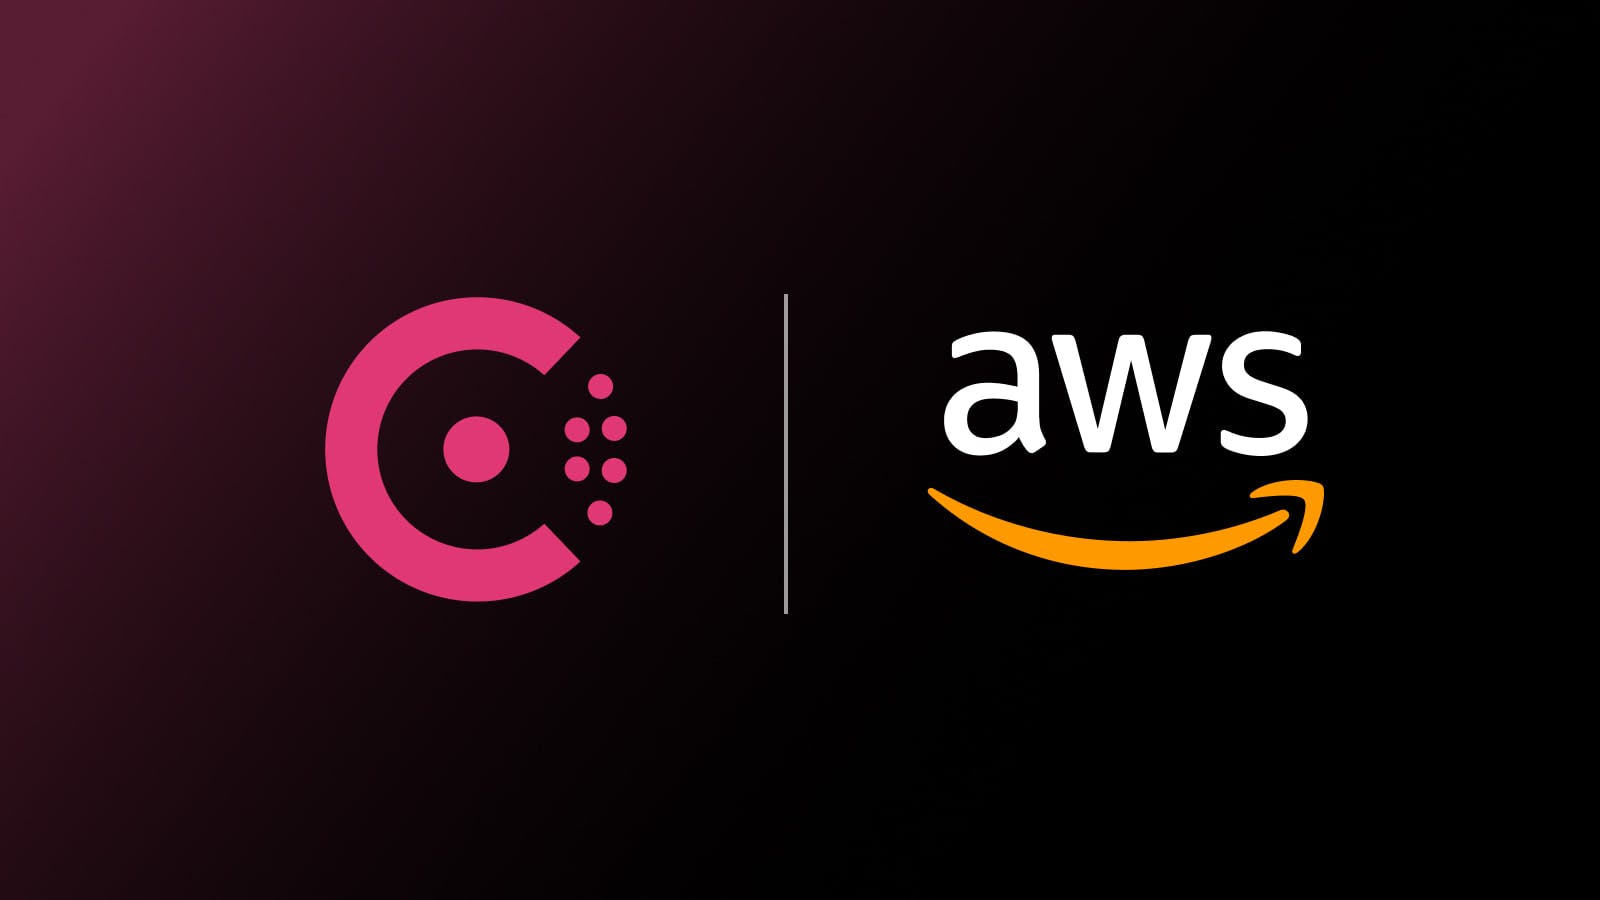 Consul Service Mesh Support for AWS Lambda Now Generally Available